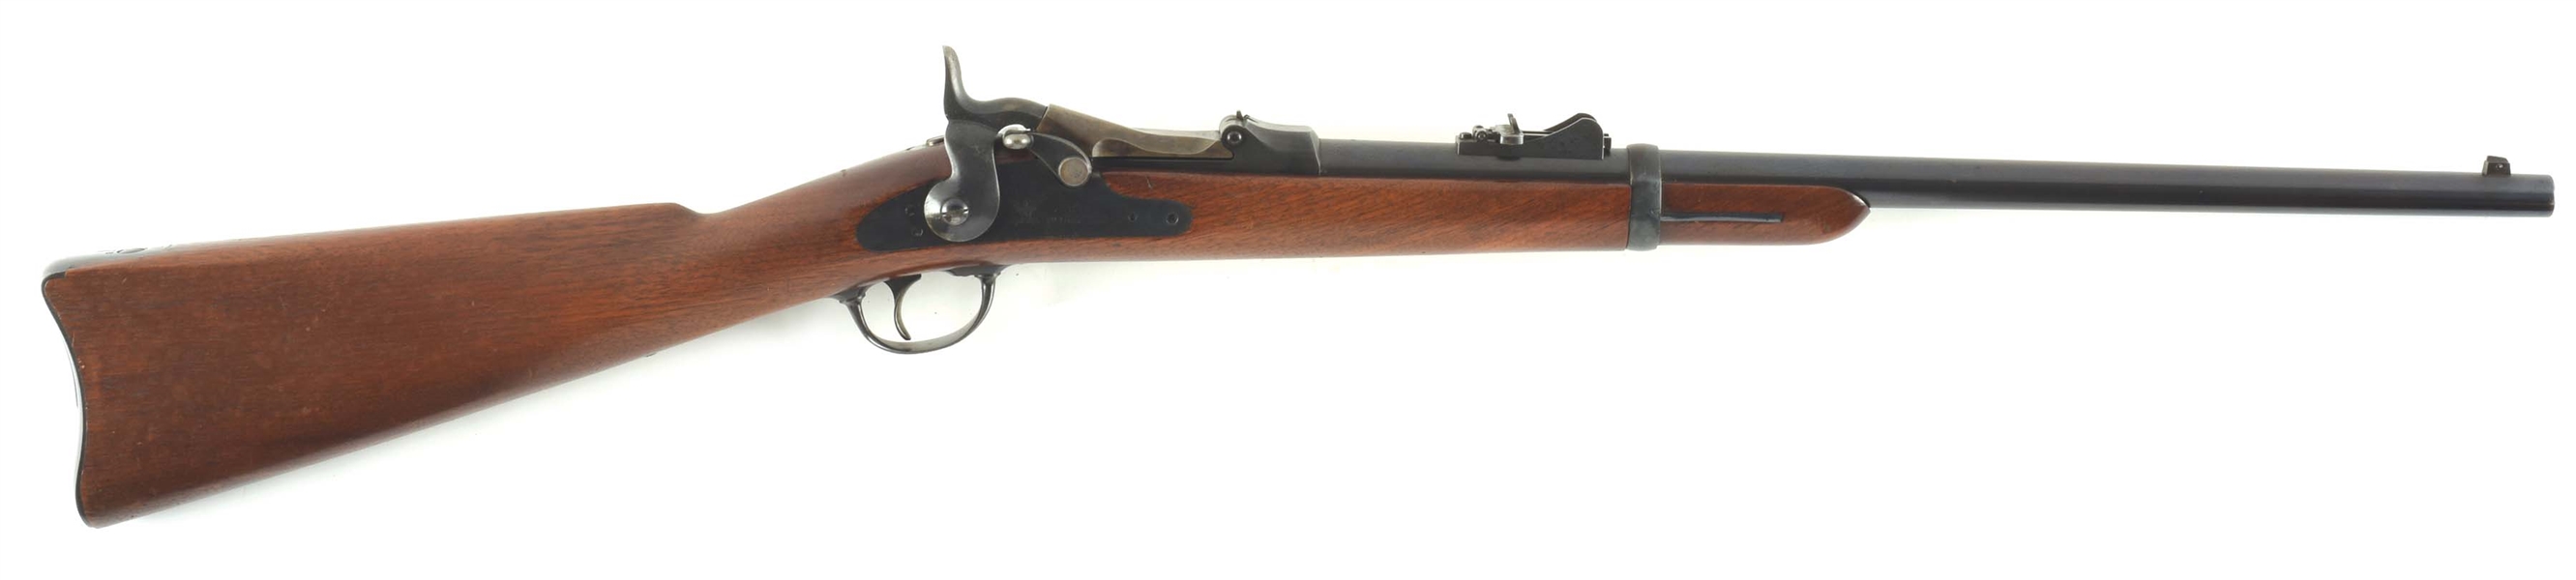 (A) PRIME US SPRINGFIELD MODEL 1873/79 TRAPDOOR SADDLE RING CARBINE.